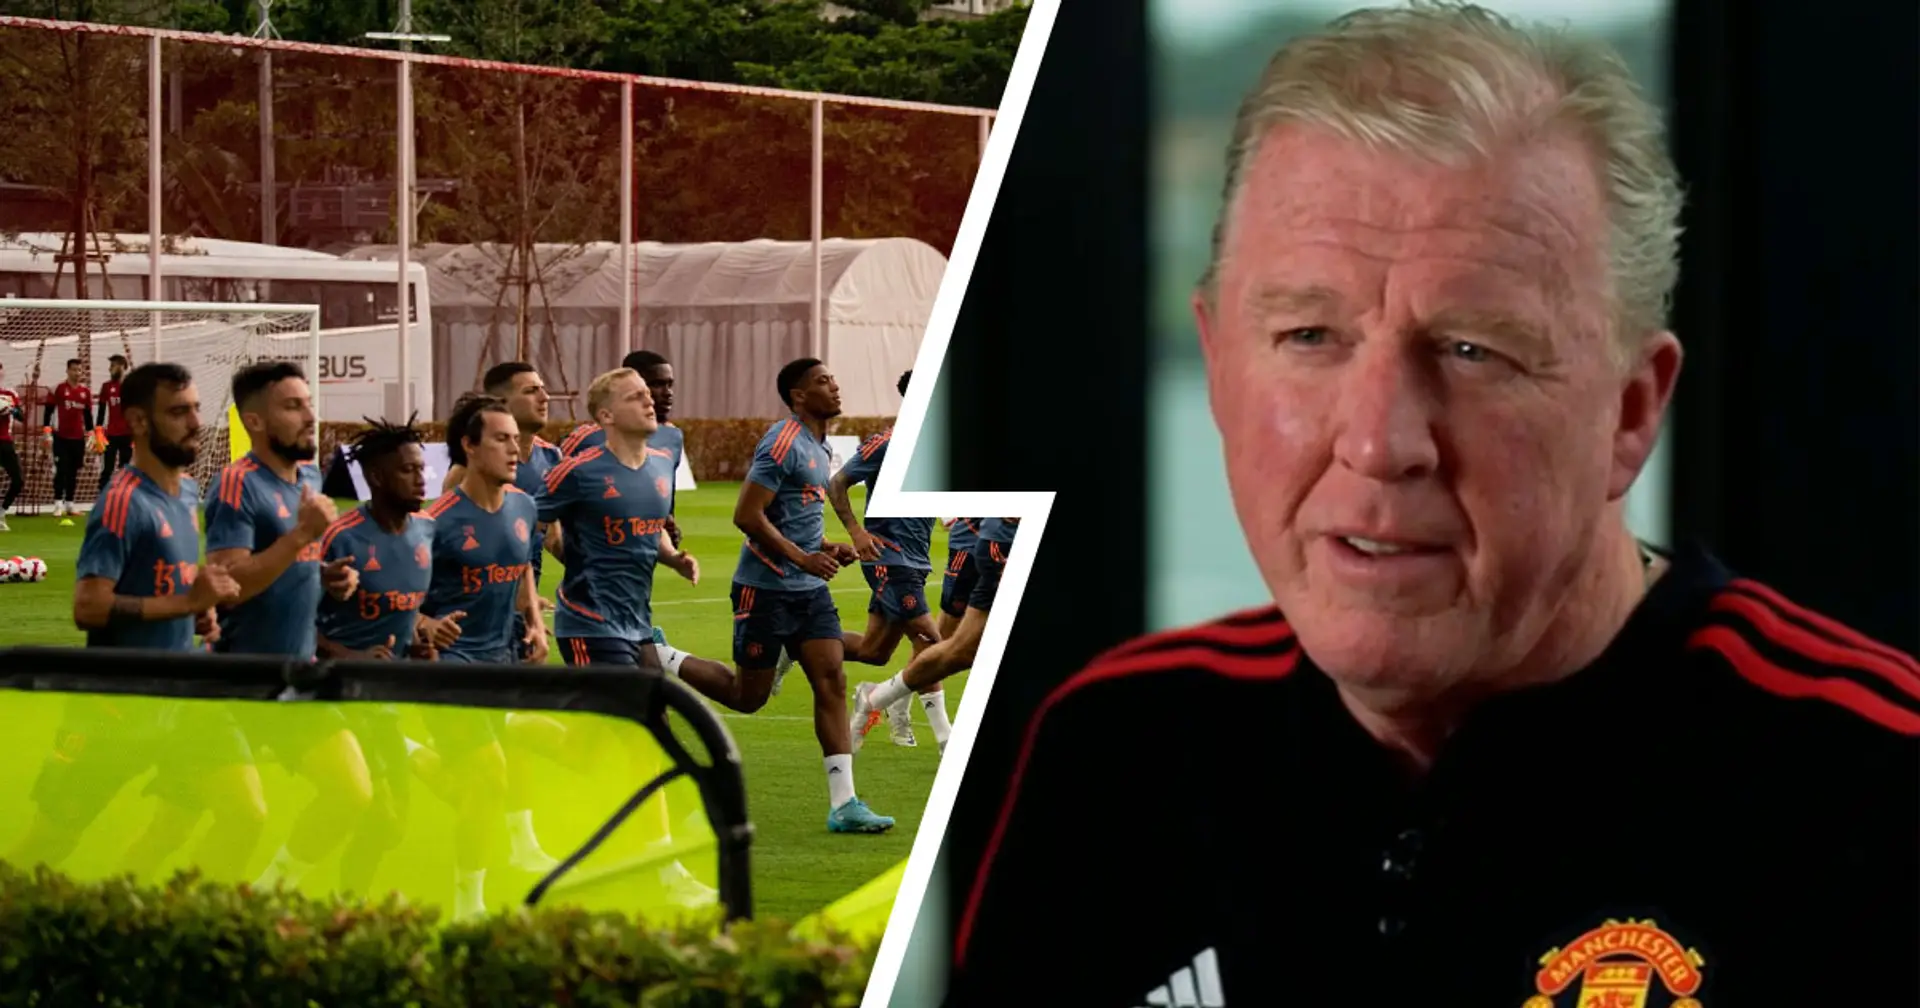 'These are great players to work with': Steve McClaren opens up on how he feels about working with United squad